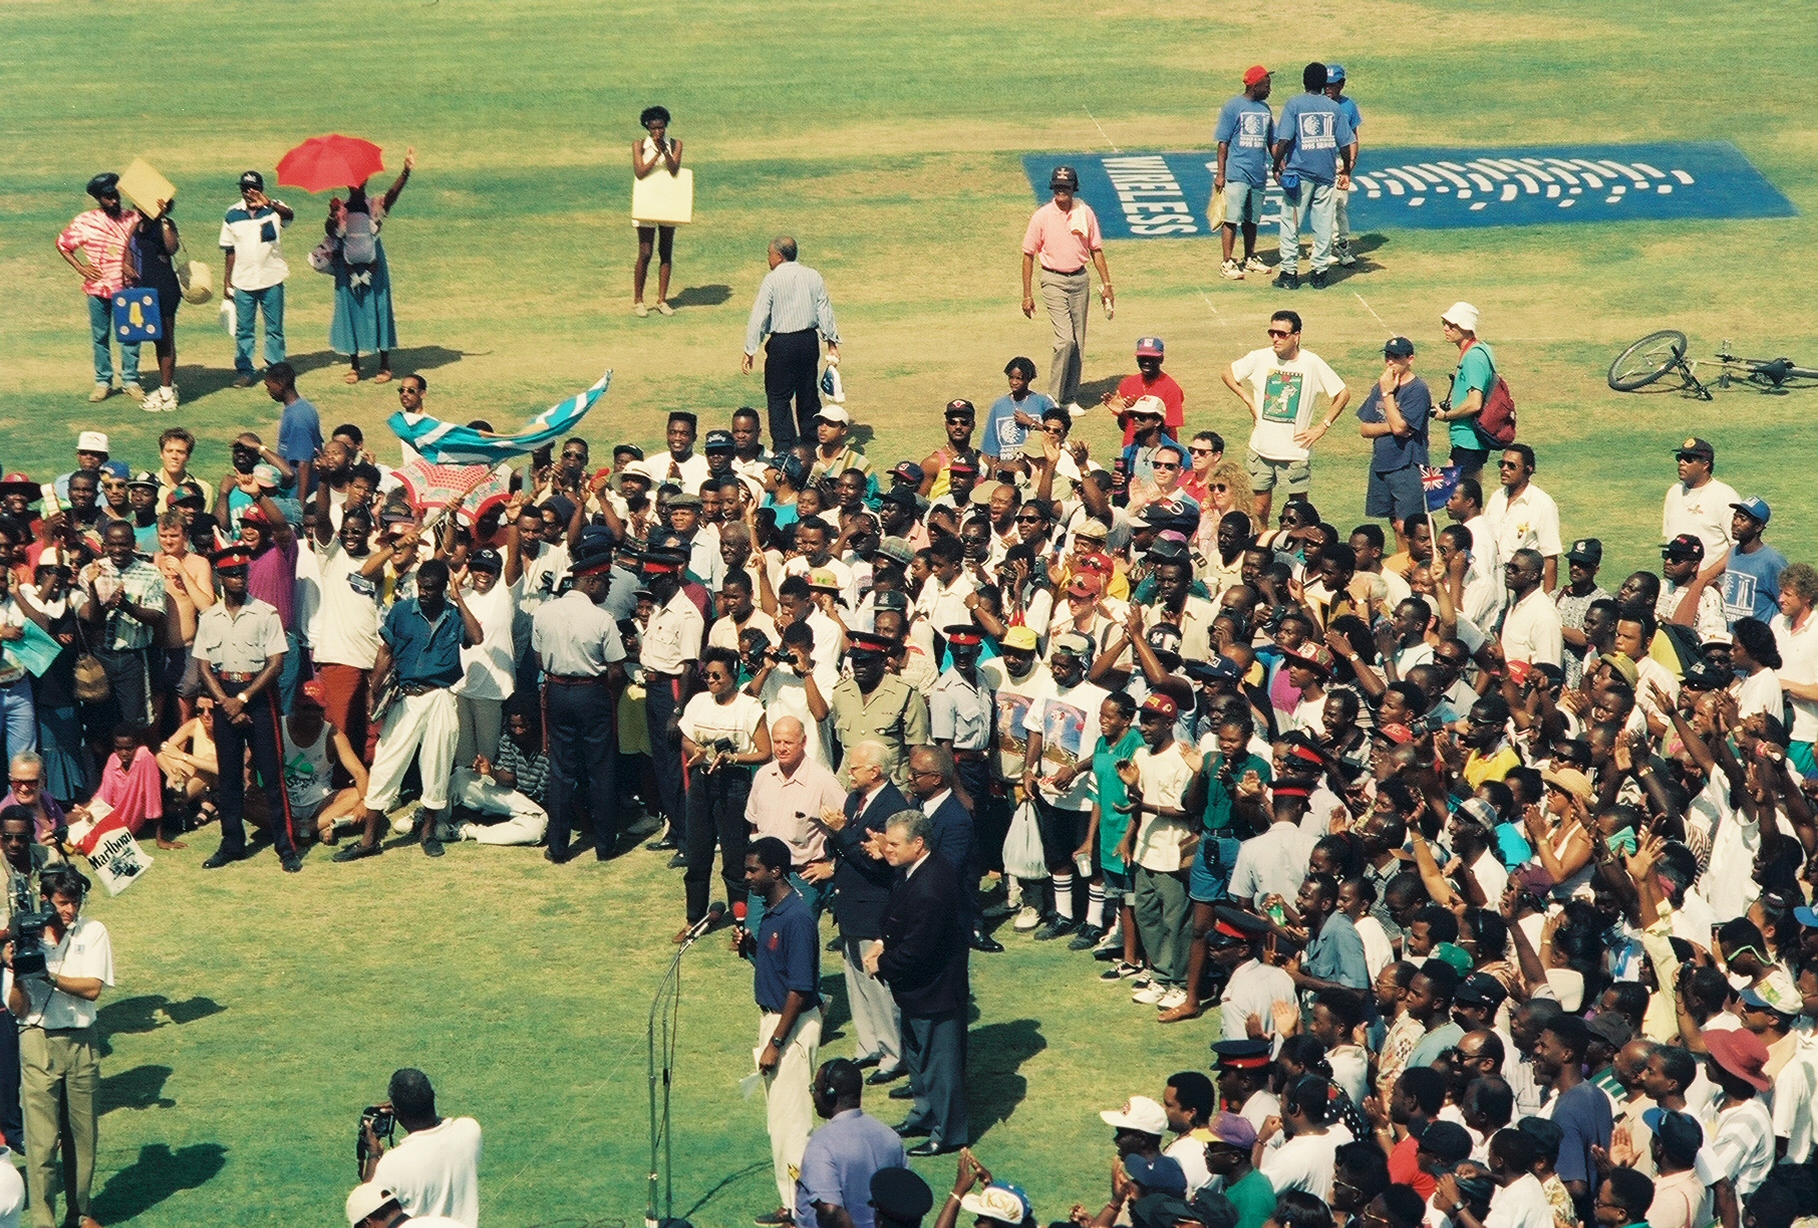 Michael Holding conducts end of Match Presentations